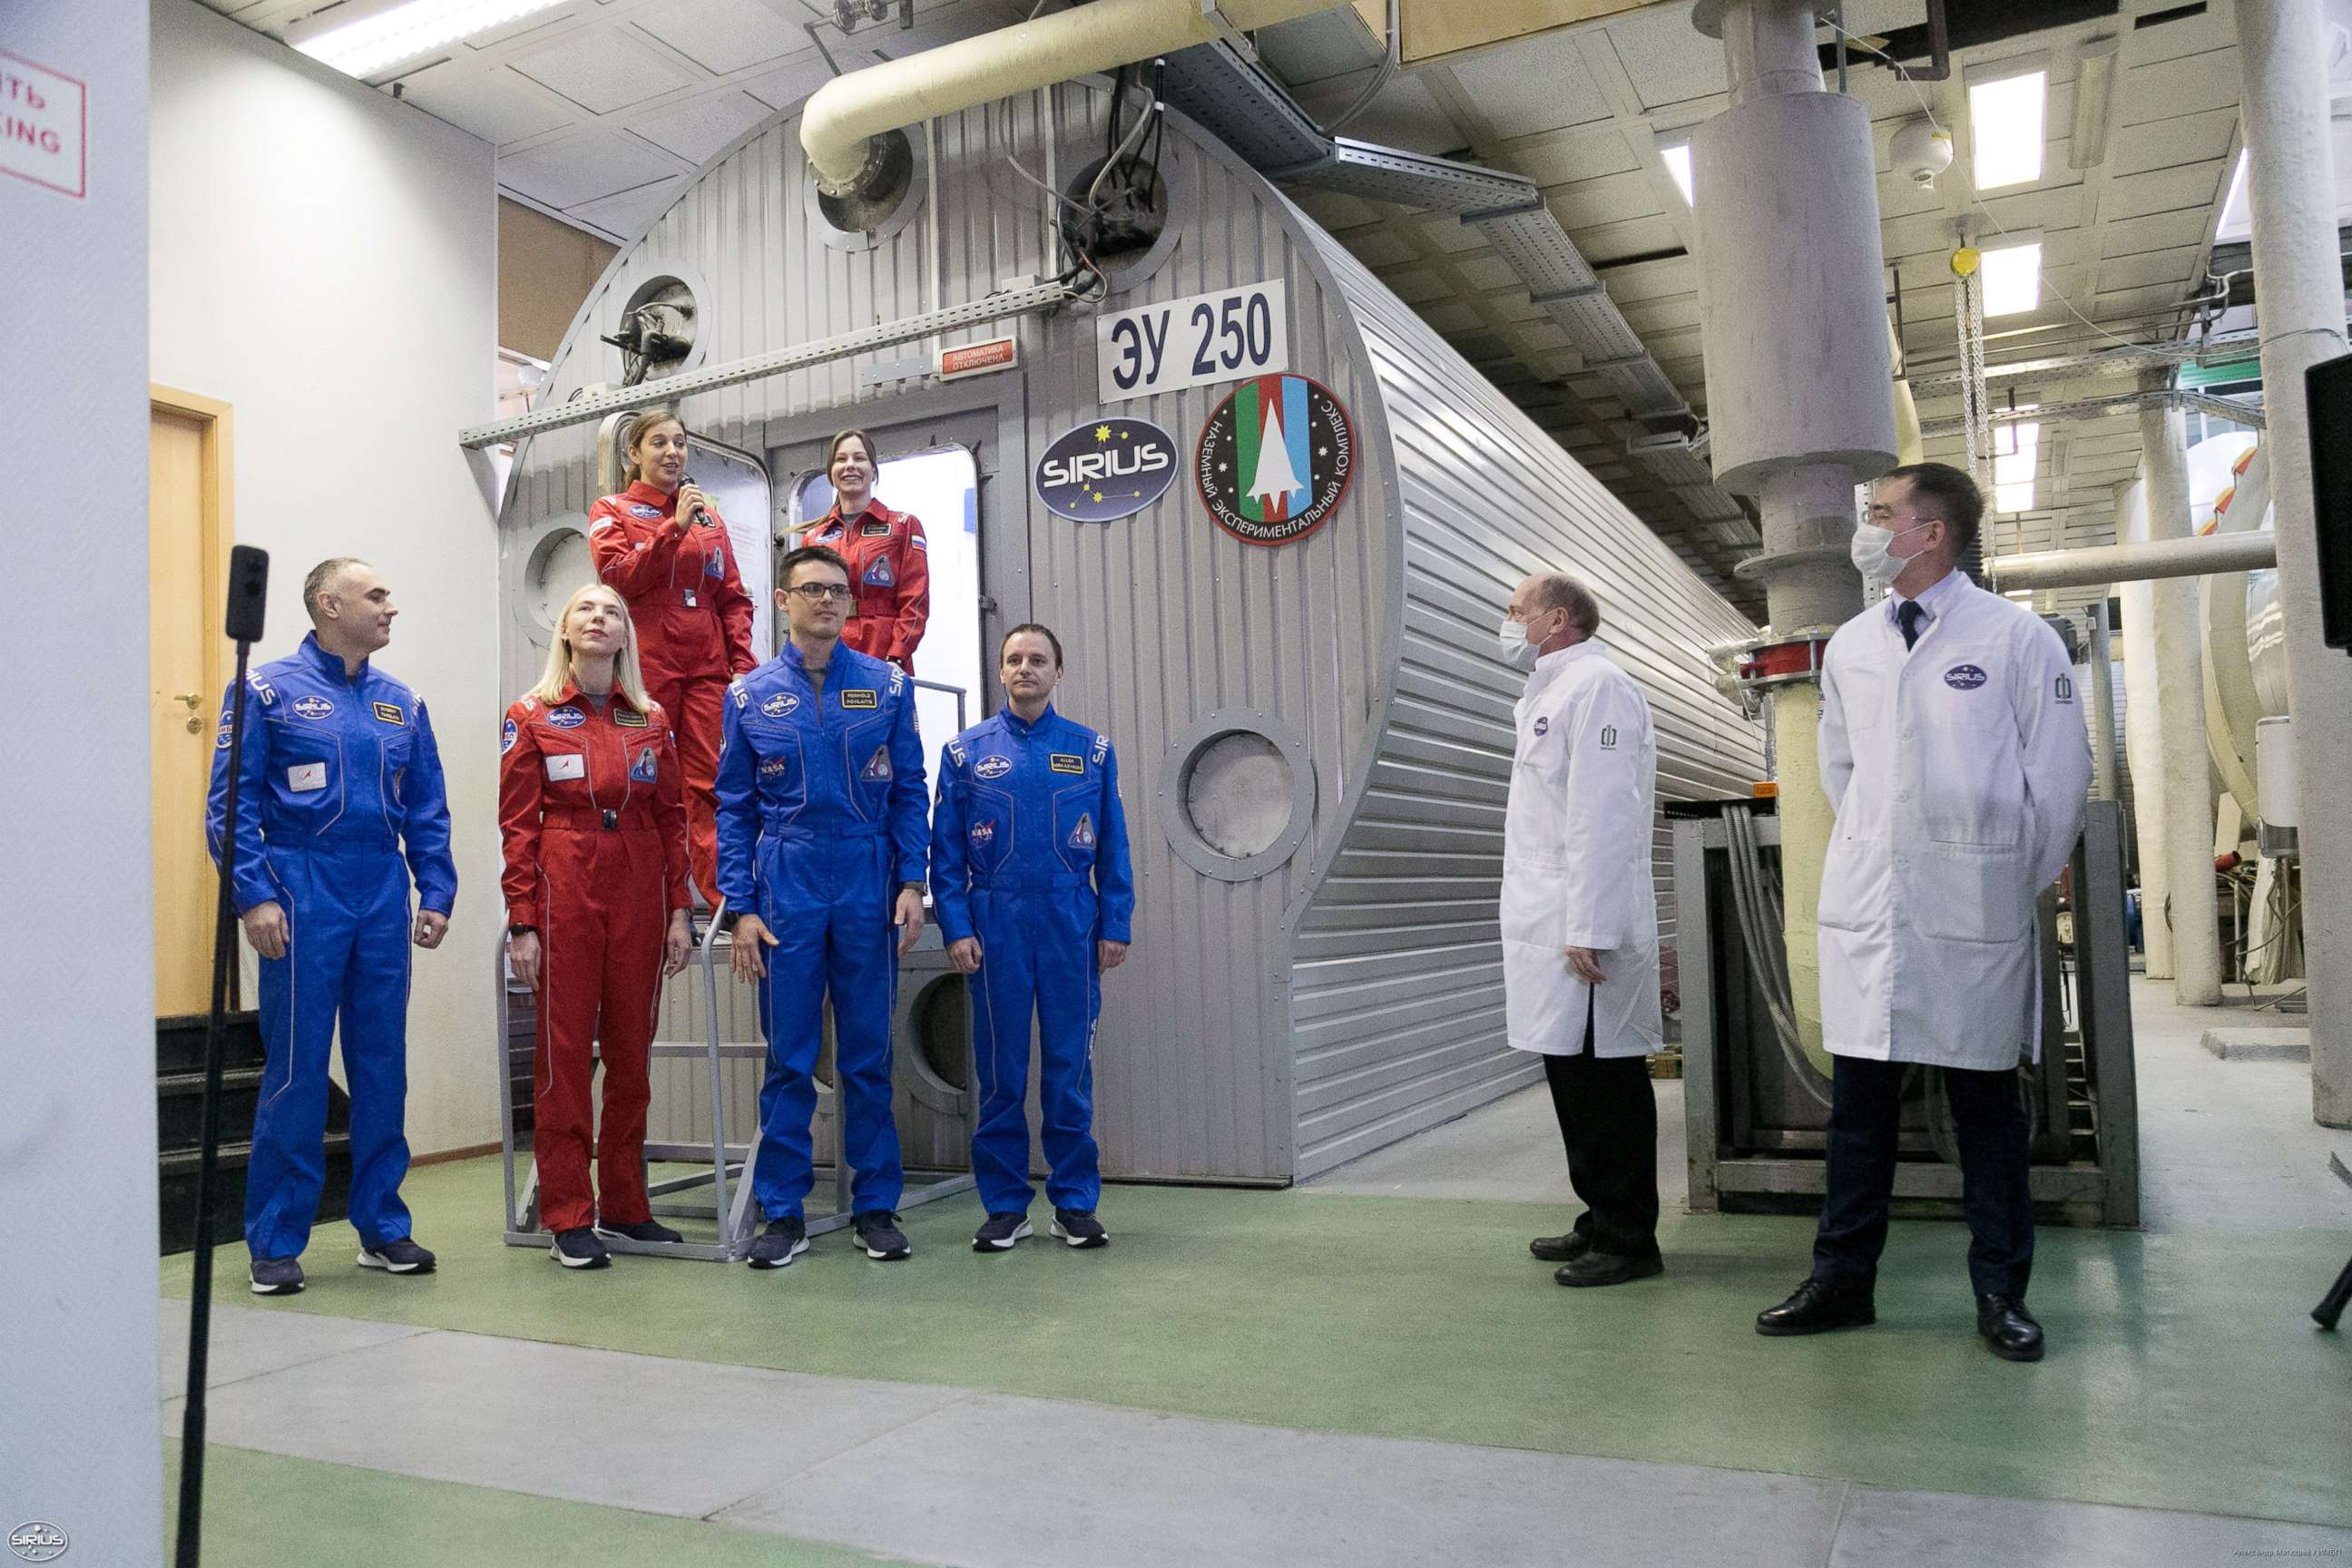 PHOTO: The SIRIUS-19 participants stand next to the habitat at Moscow's Institute of Biomedical Problems where they will spend the next 4 months locked inside.